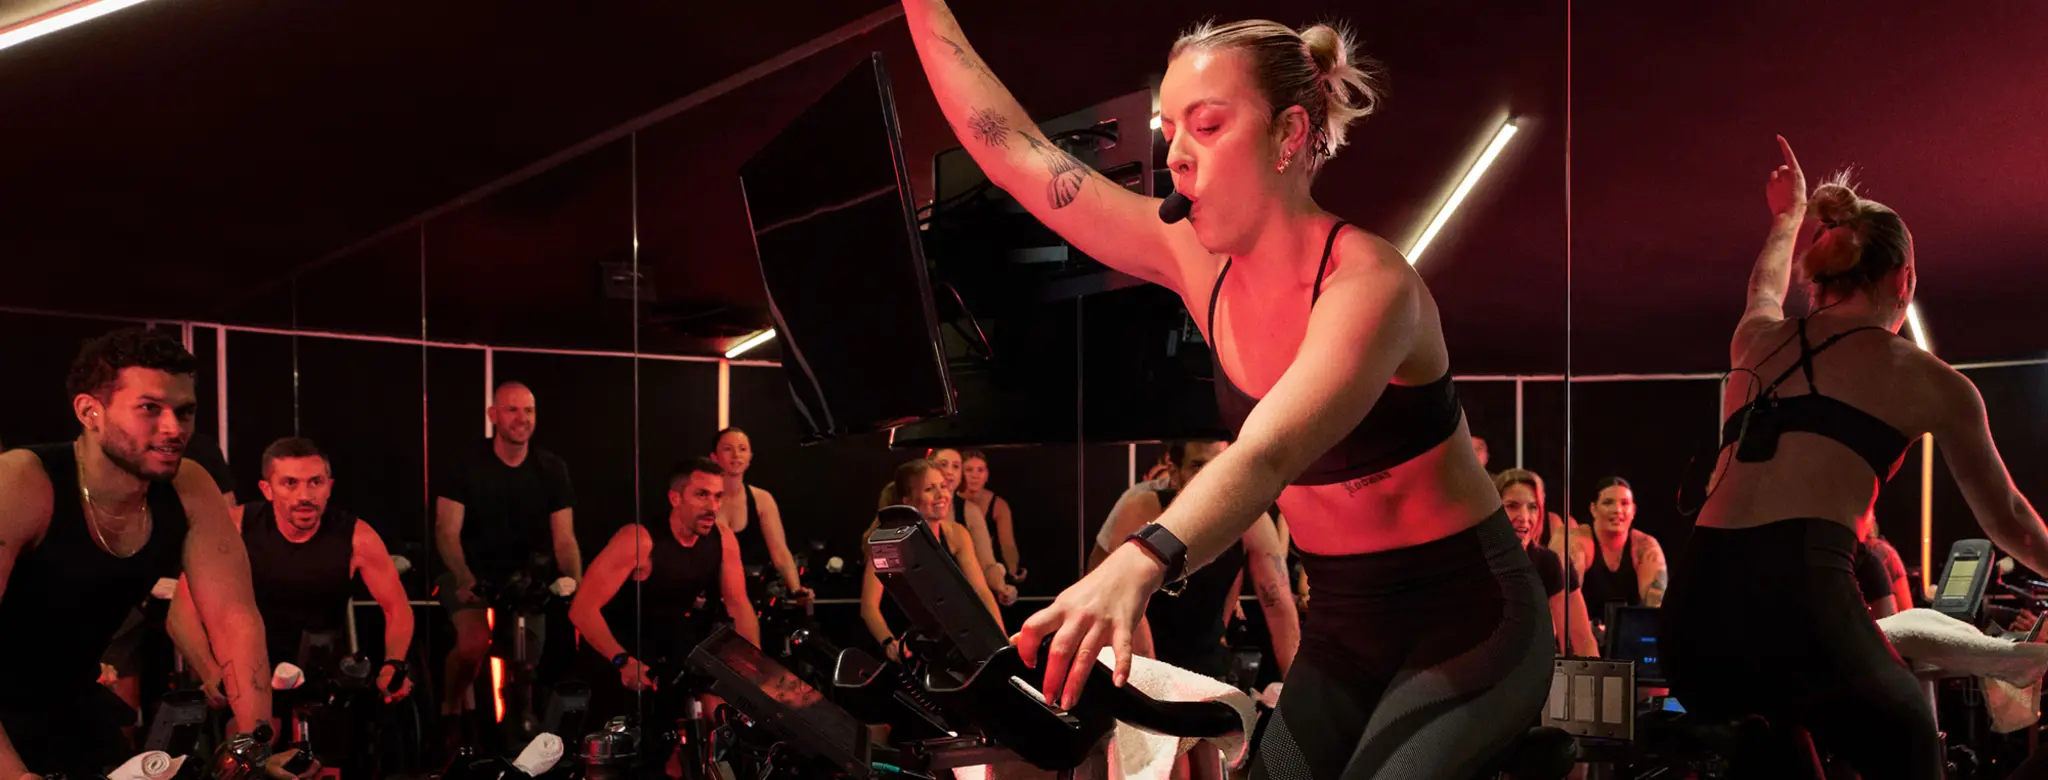 woman teaching full cycling class energetically with arm raised